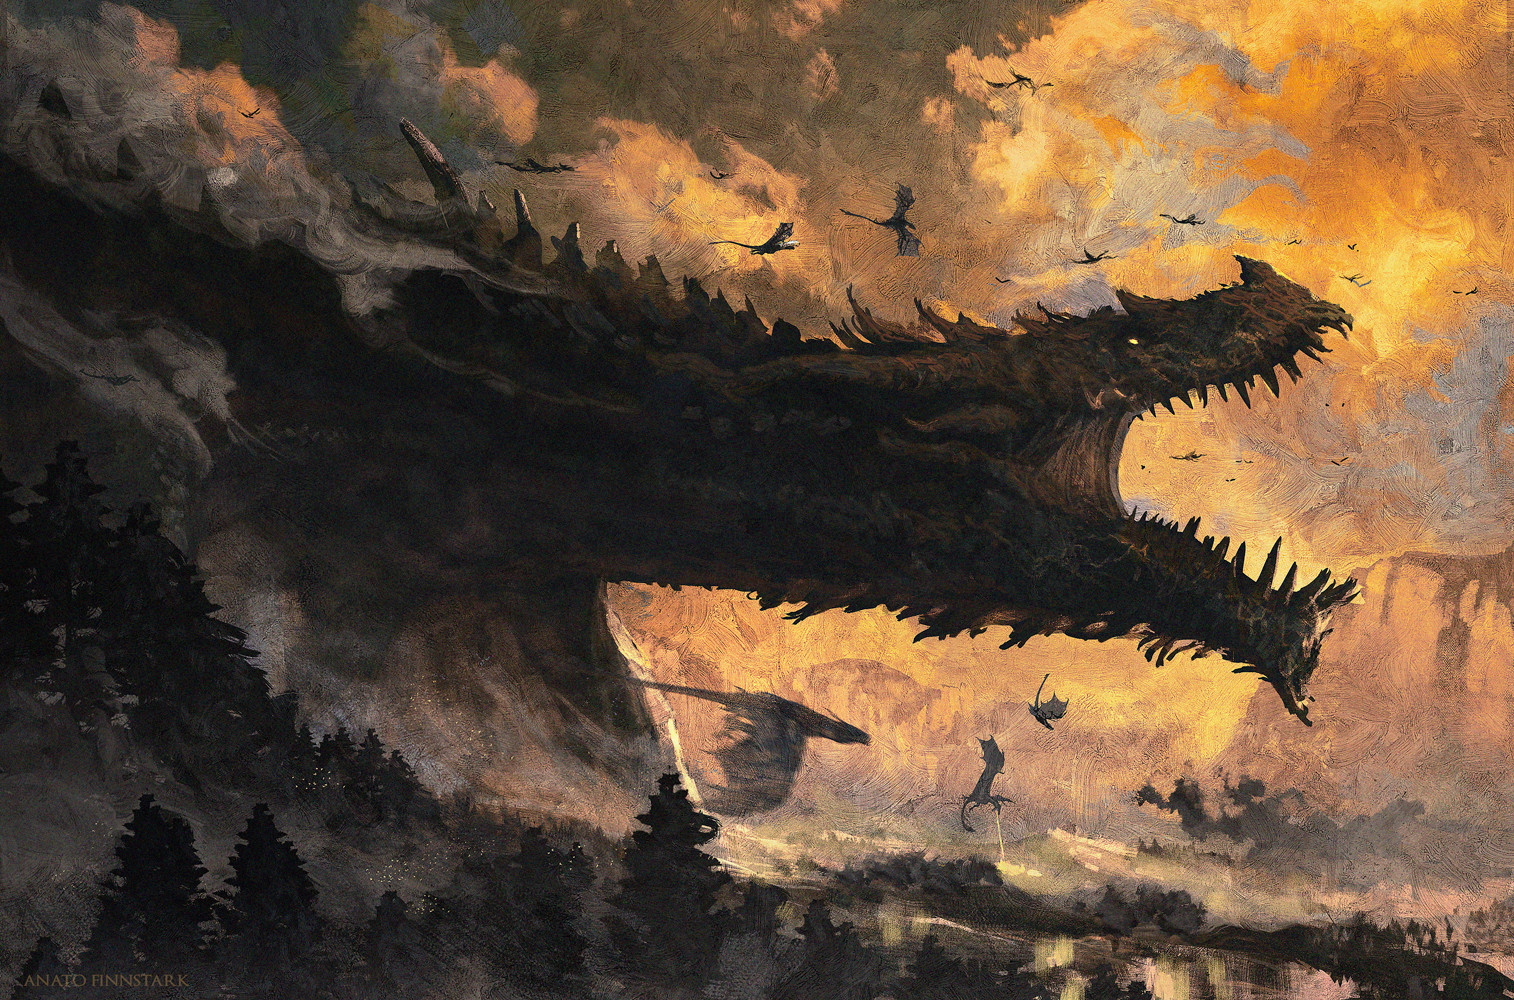 Top 15 Glaurung Quotes: Famous Quotes & Sayings About Glaurung